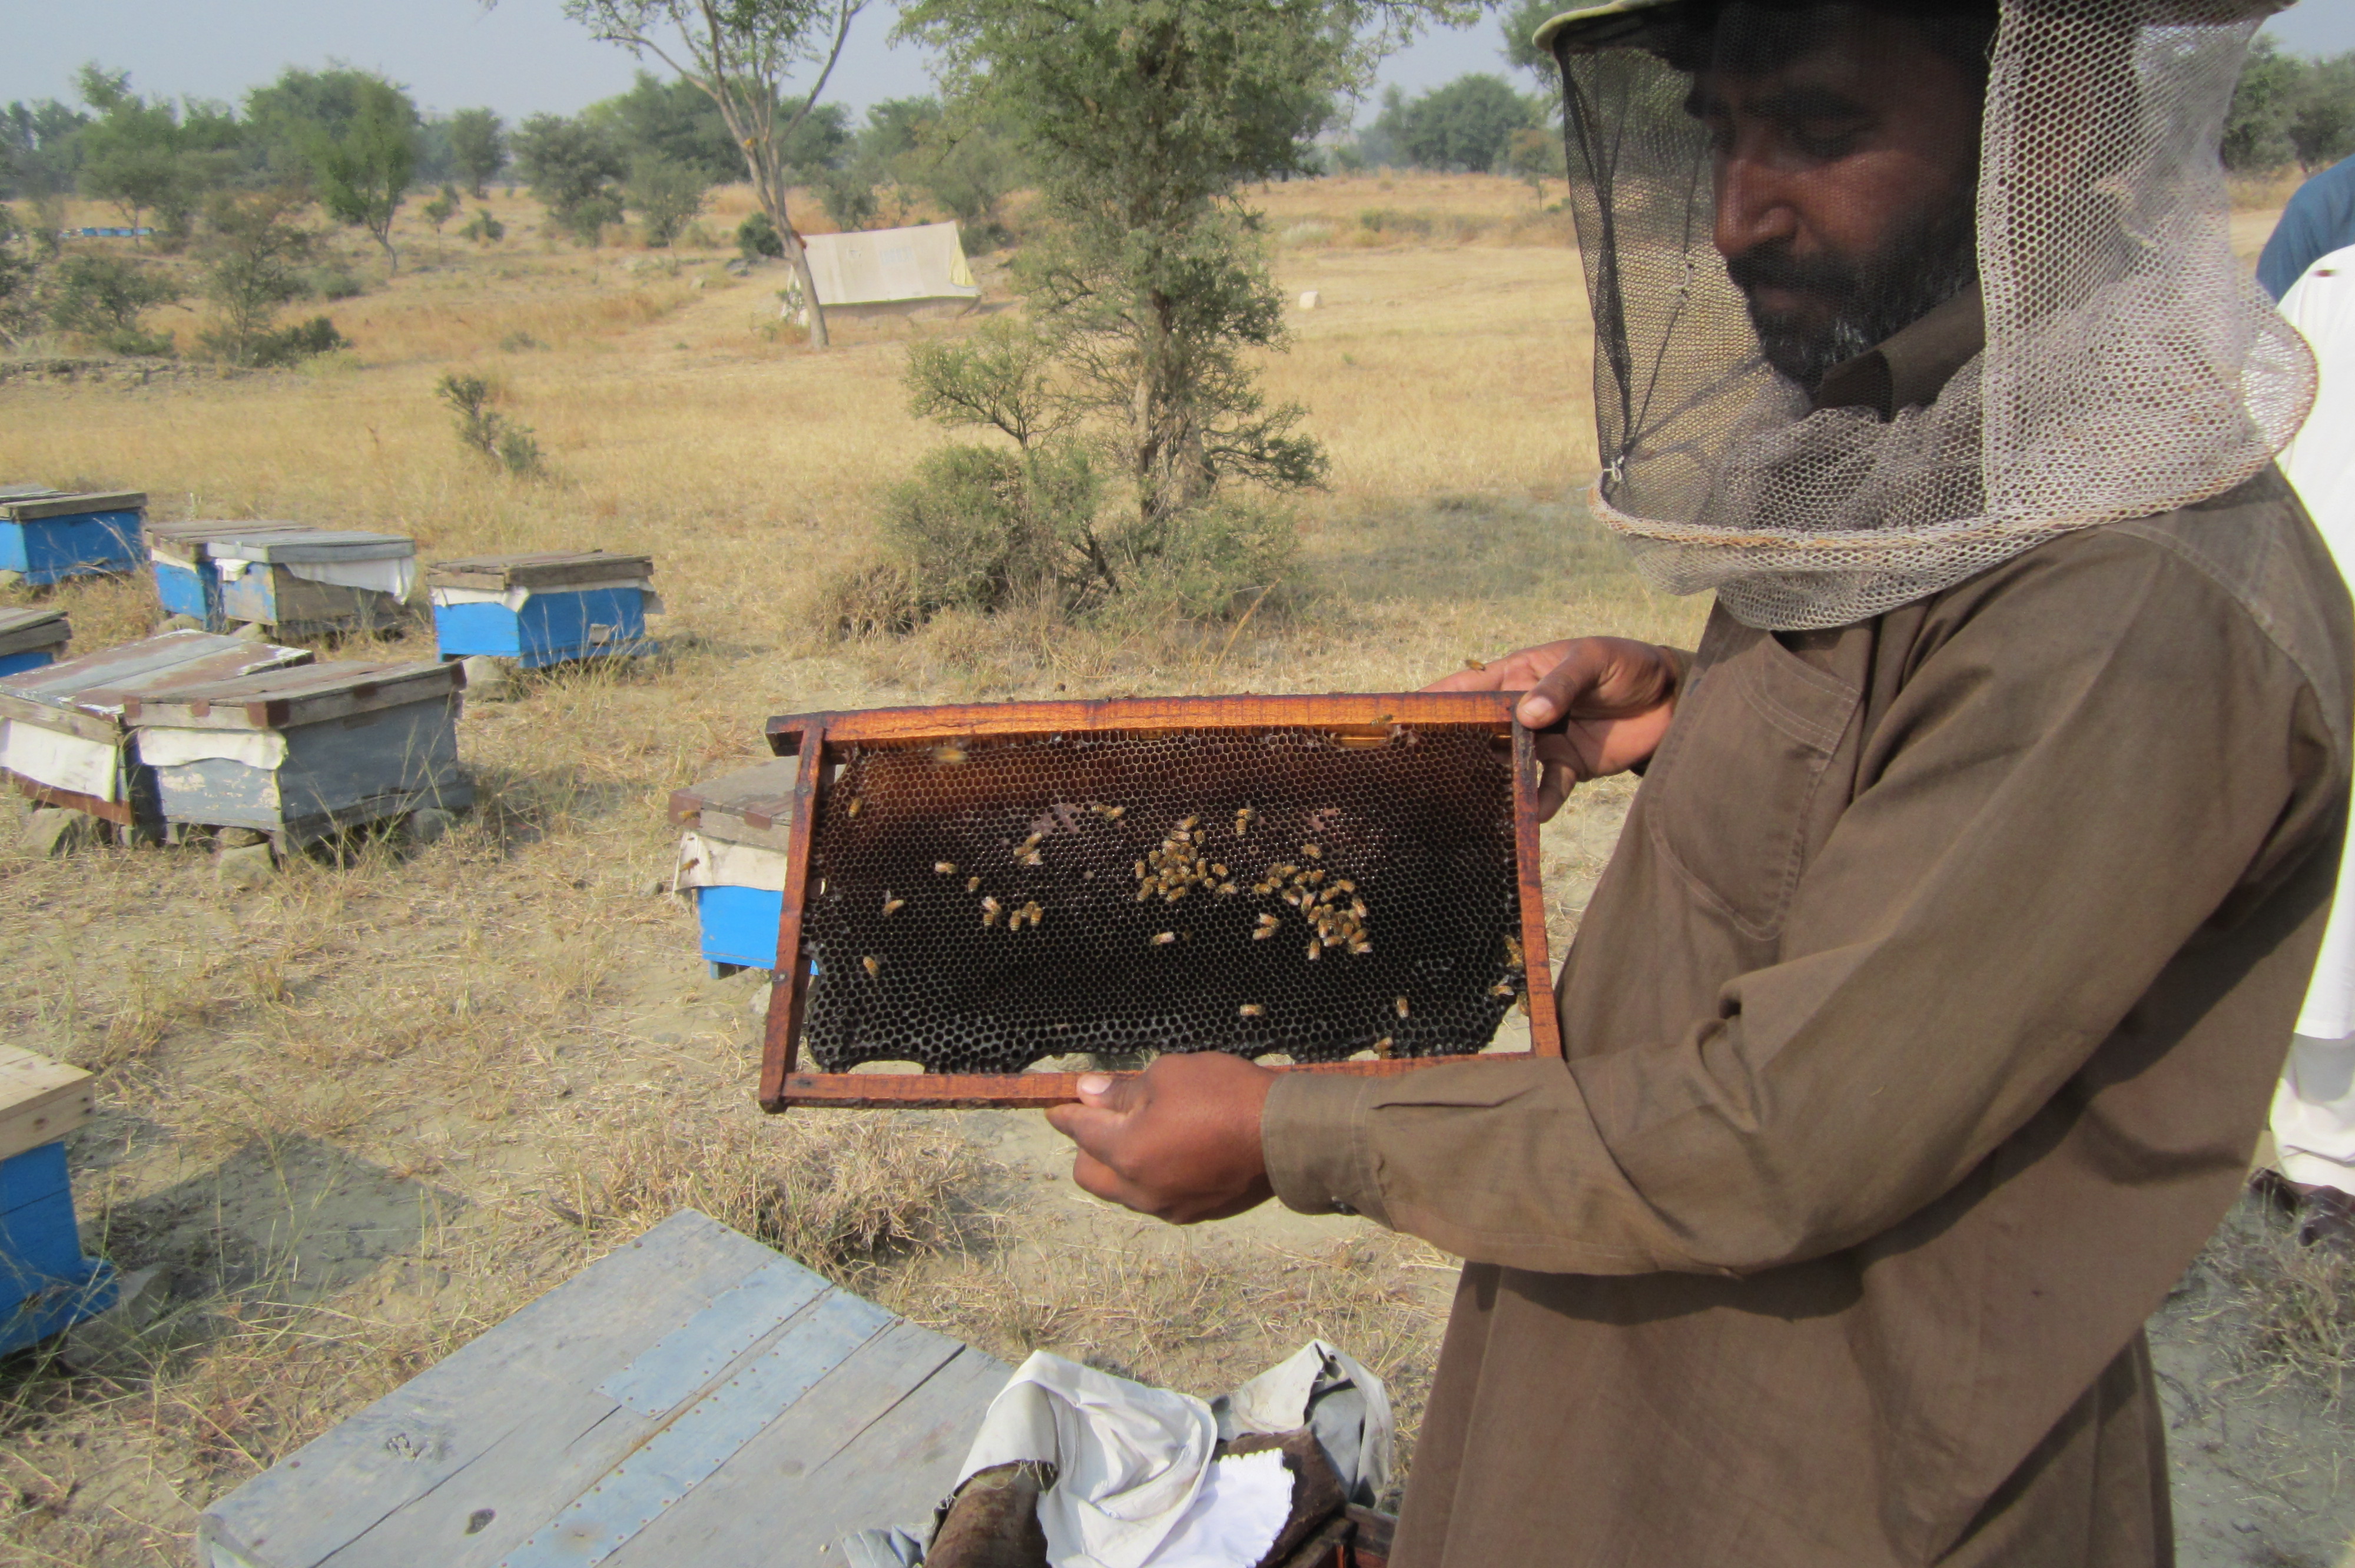 The man working with bee-boxes